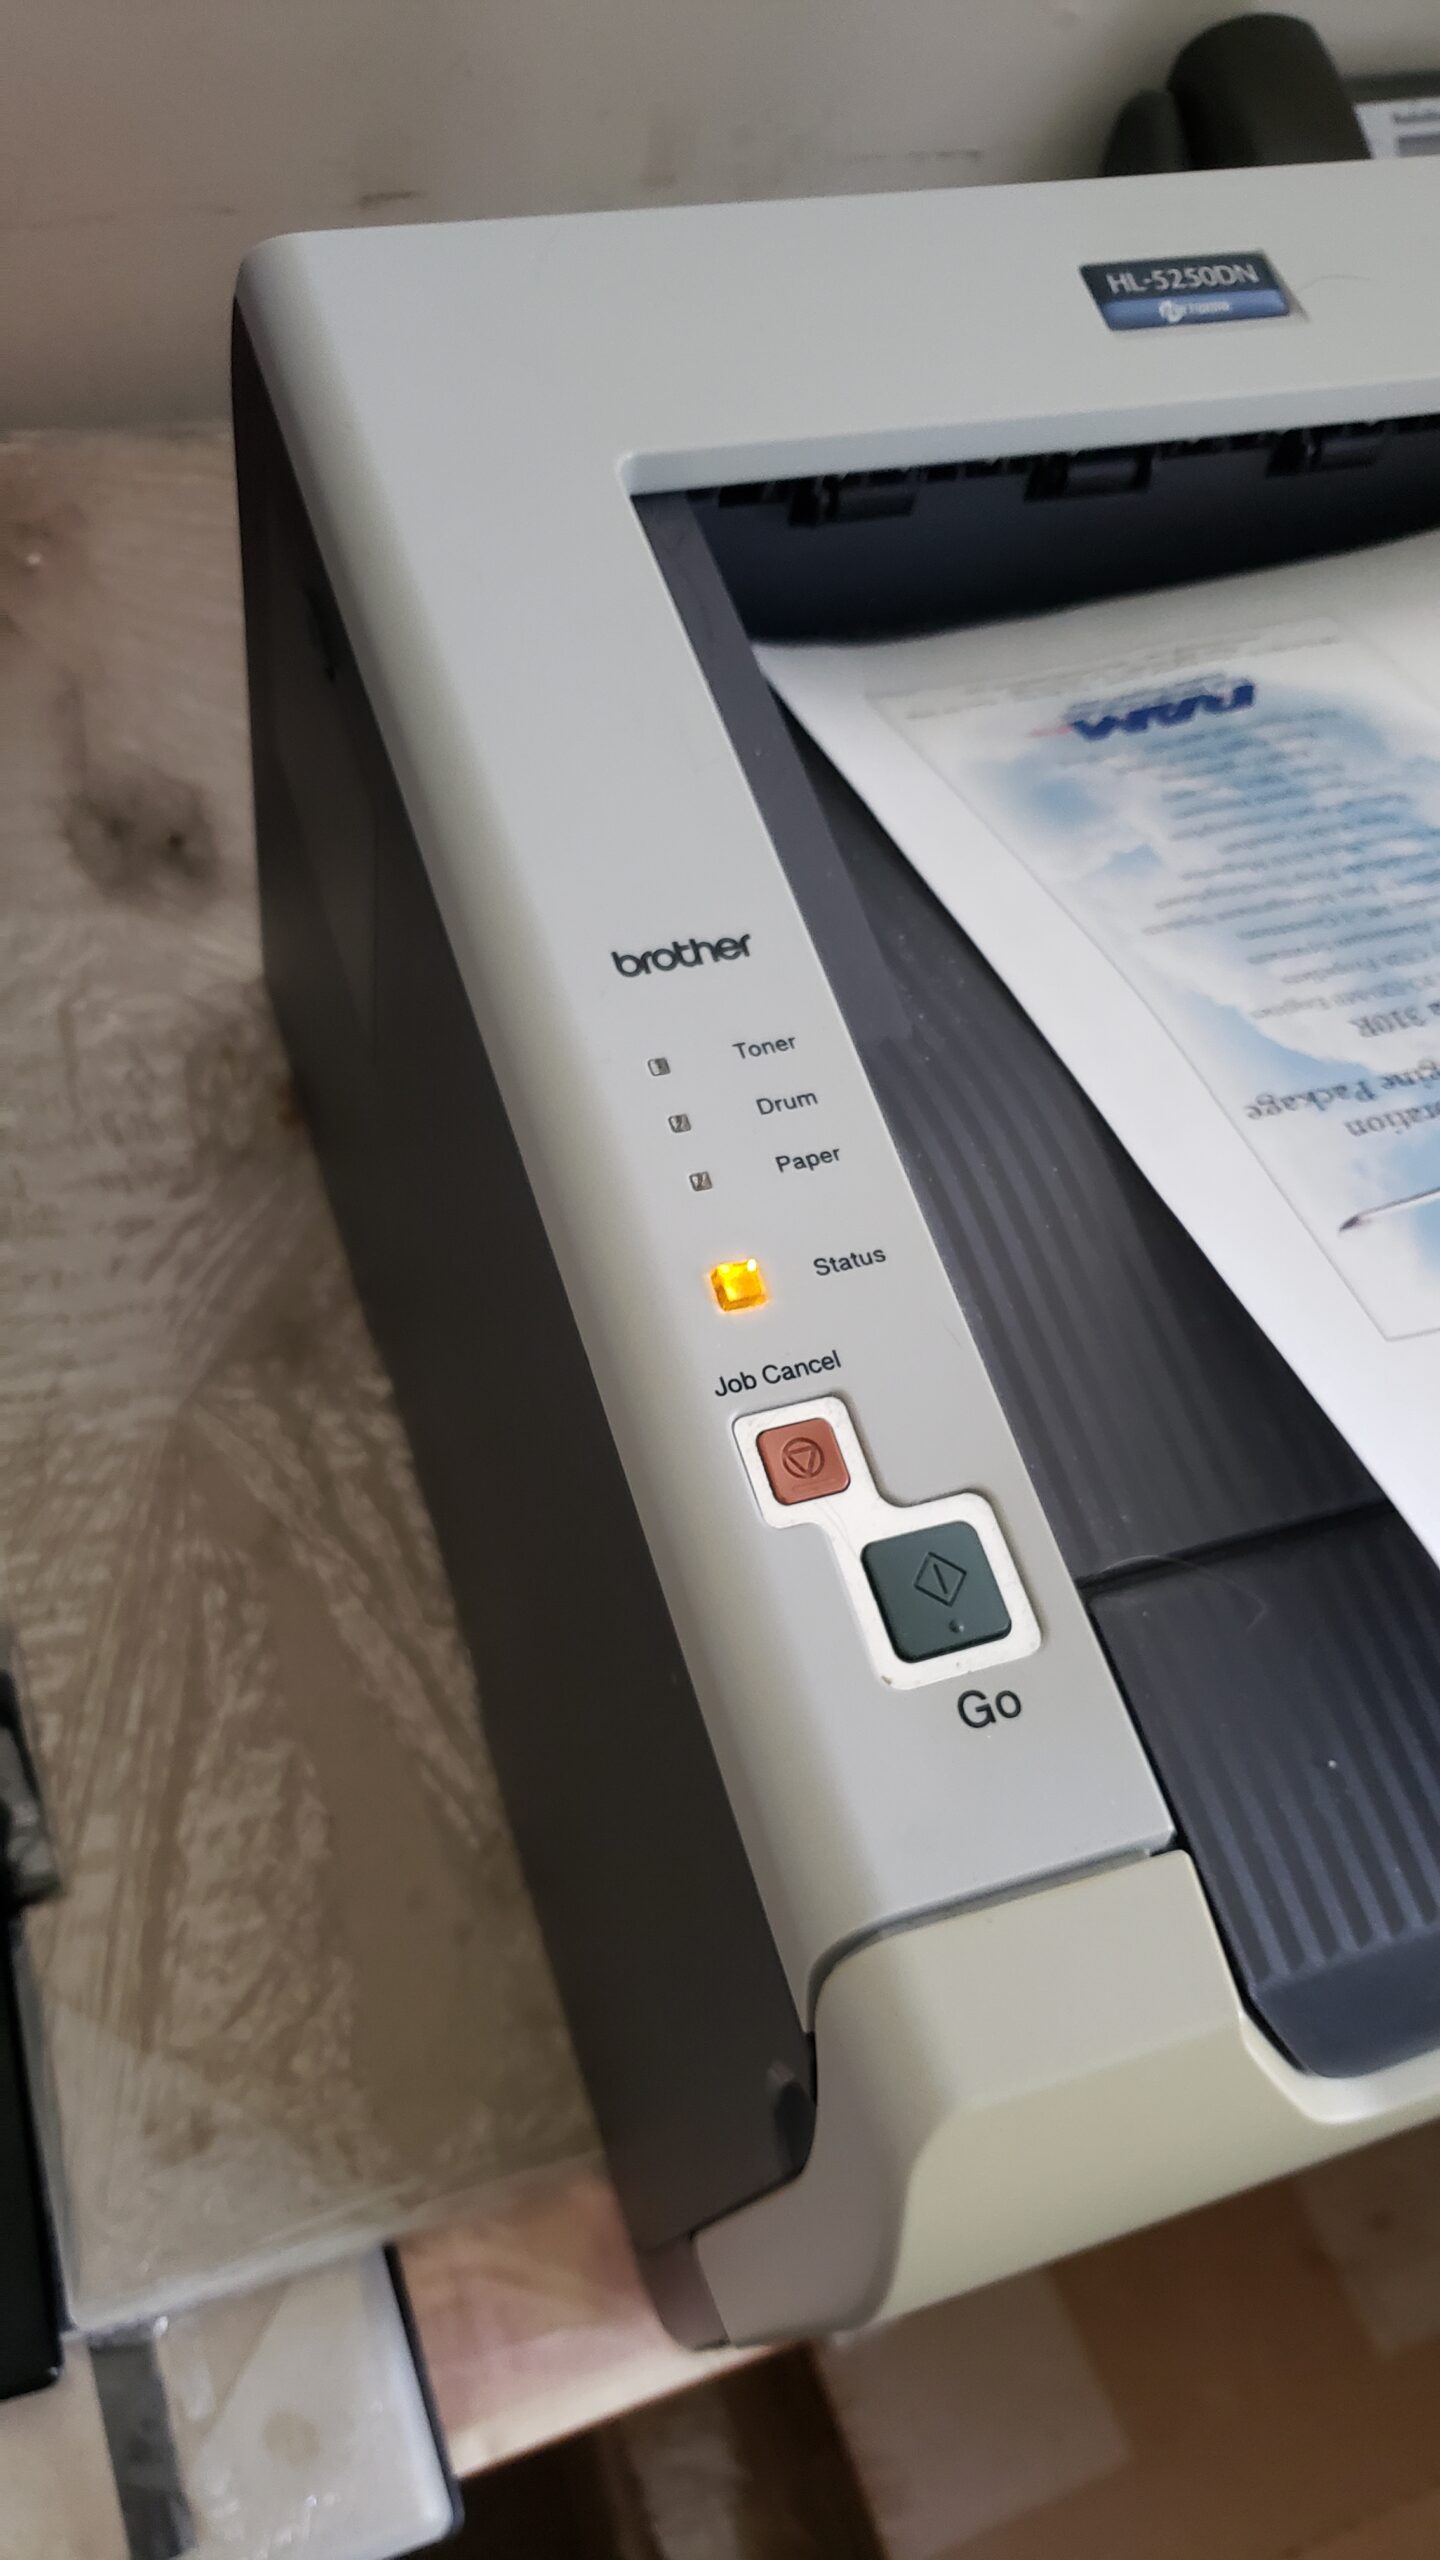 You’re not going to believe this – my printer stopped